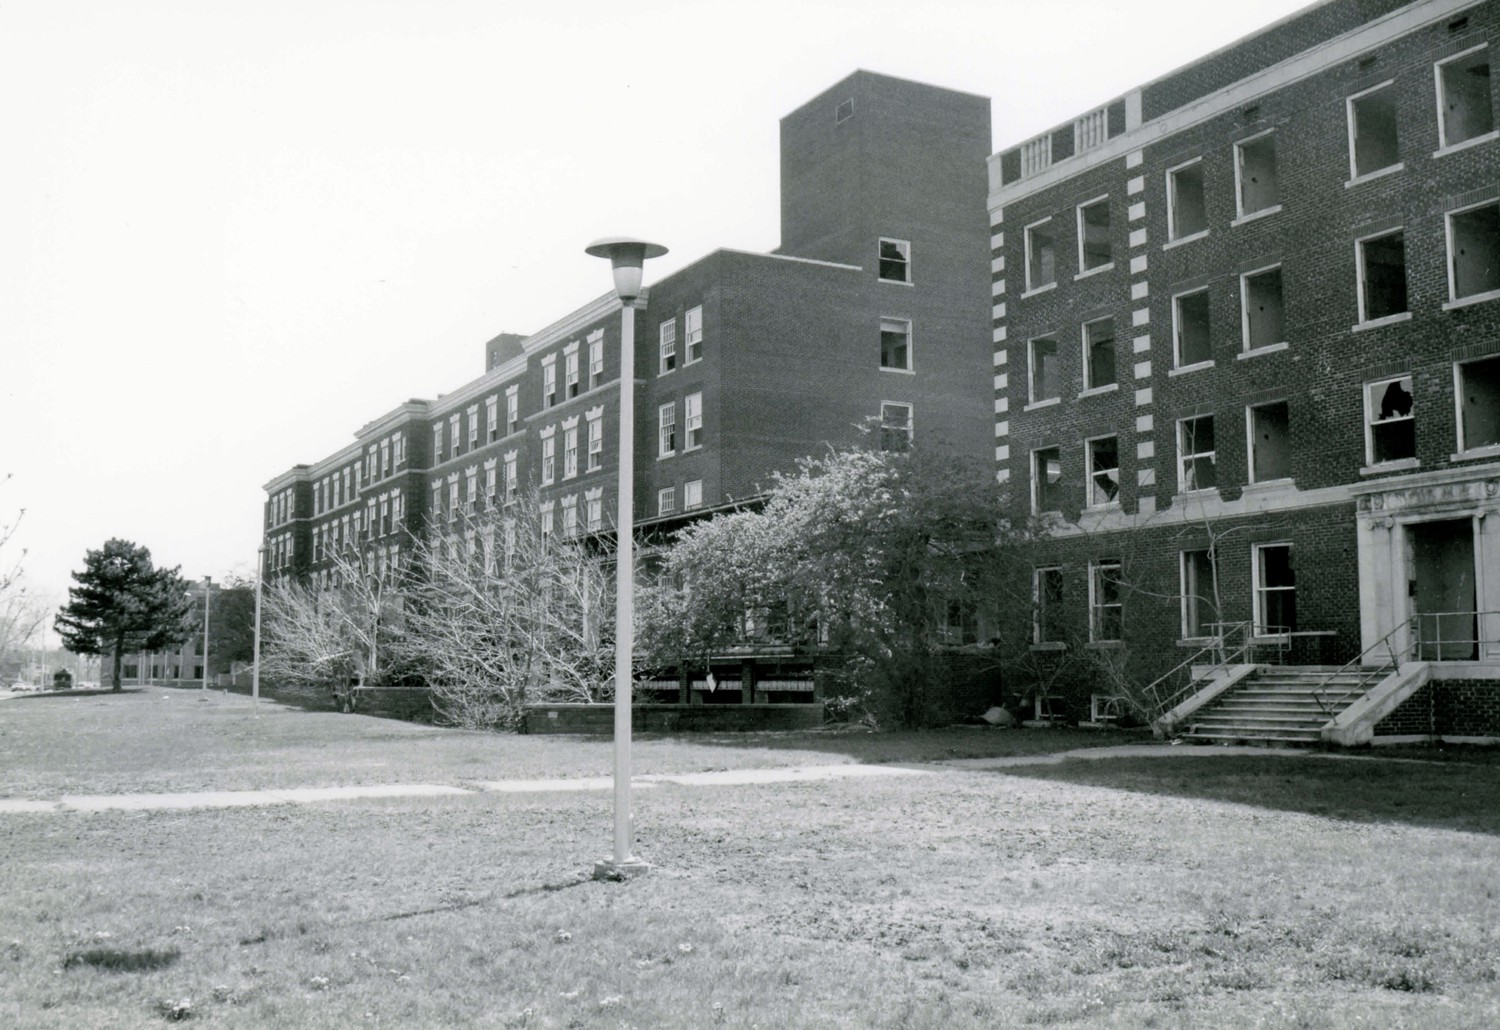 Highland Park General Hospital, Highland Park Michigan Main building, with Nurses' Home in foreground view from northwest (1985)